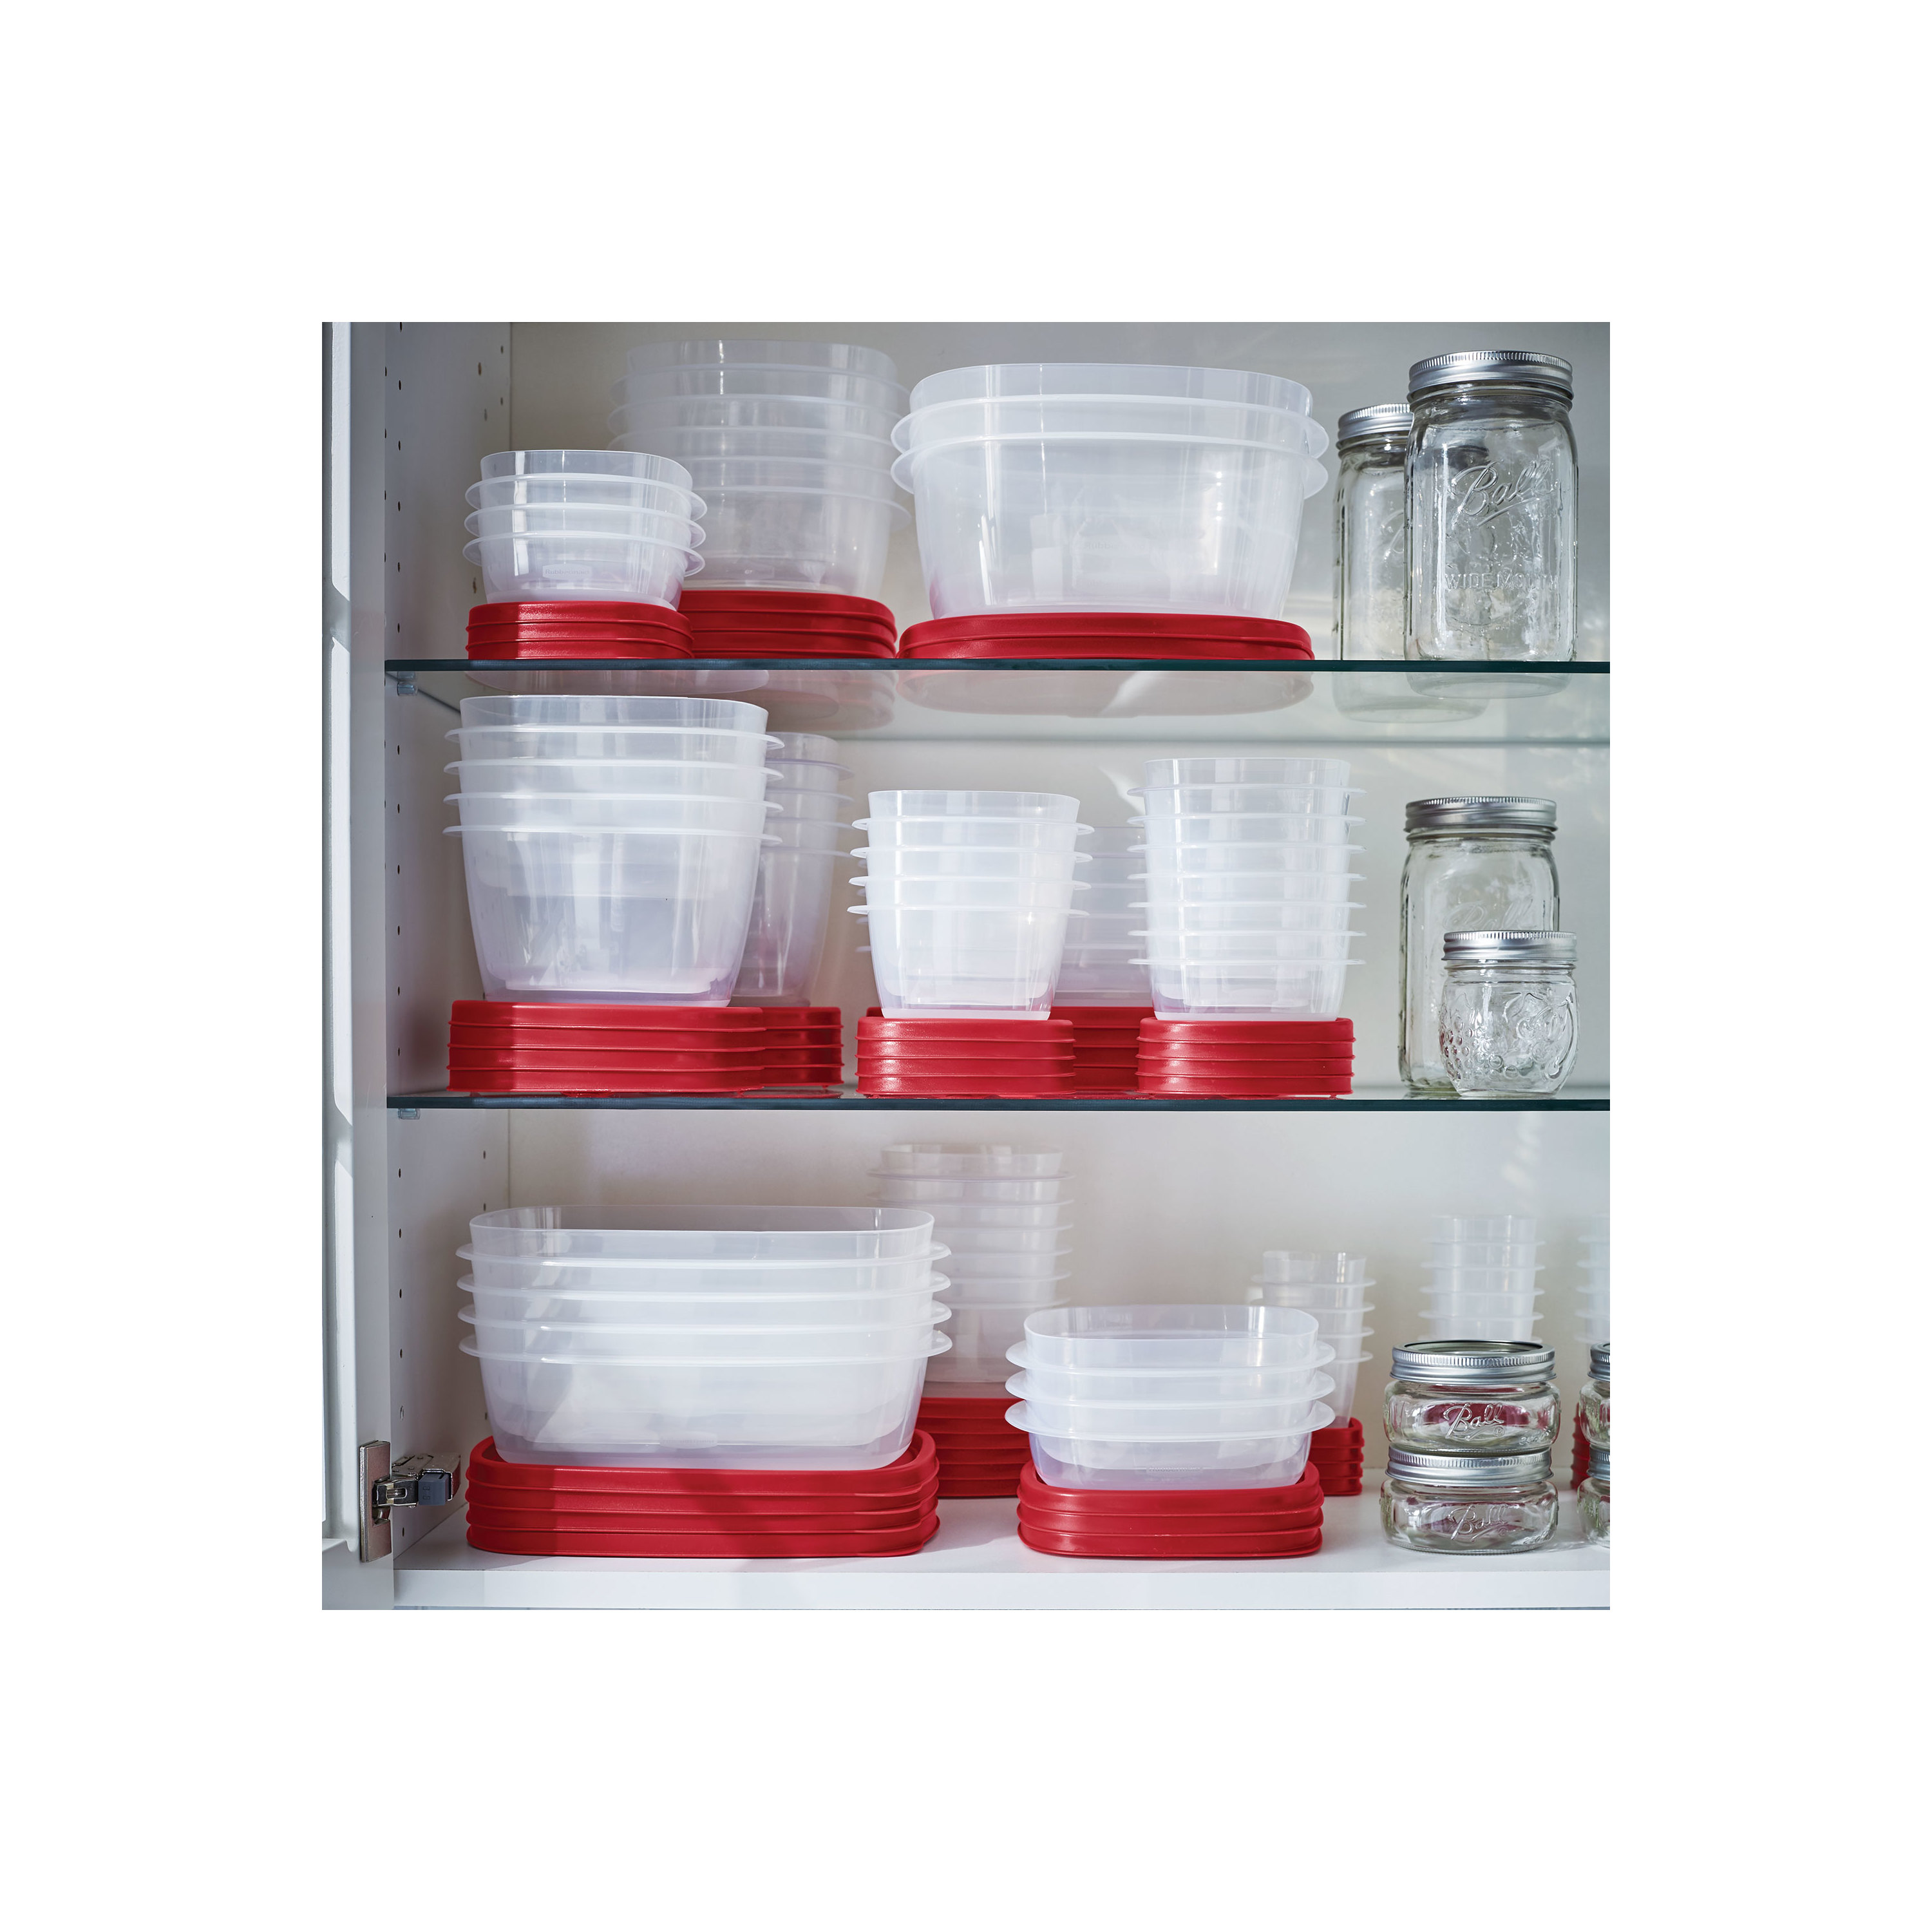 Rubbermaid EasyFindLids 26 Piece Plastic Food Storage Container Set with Vents, (39.5 Cup), Racer Red - image 4 of 9